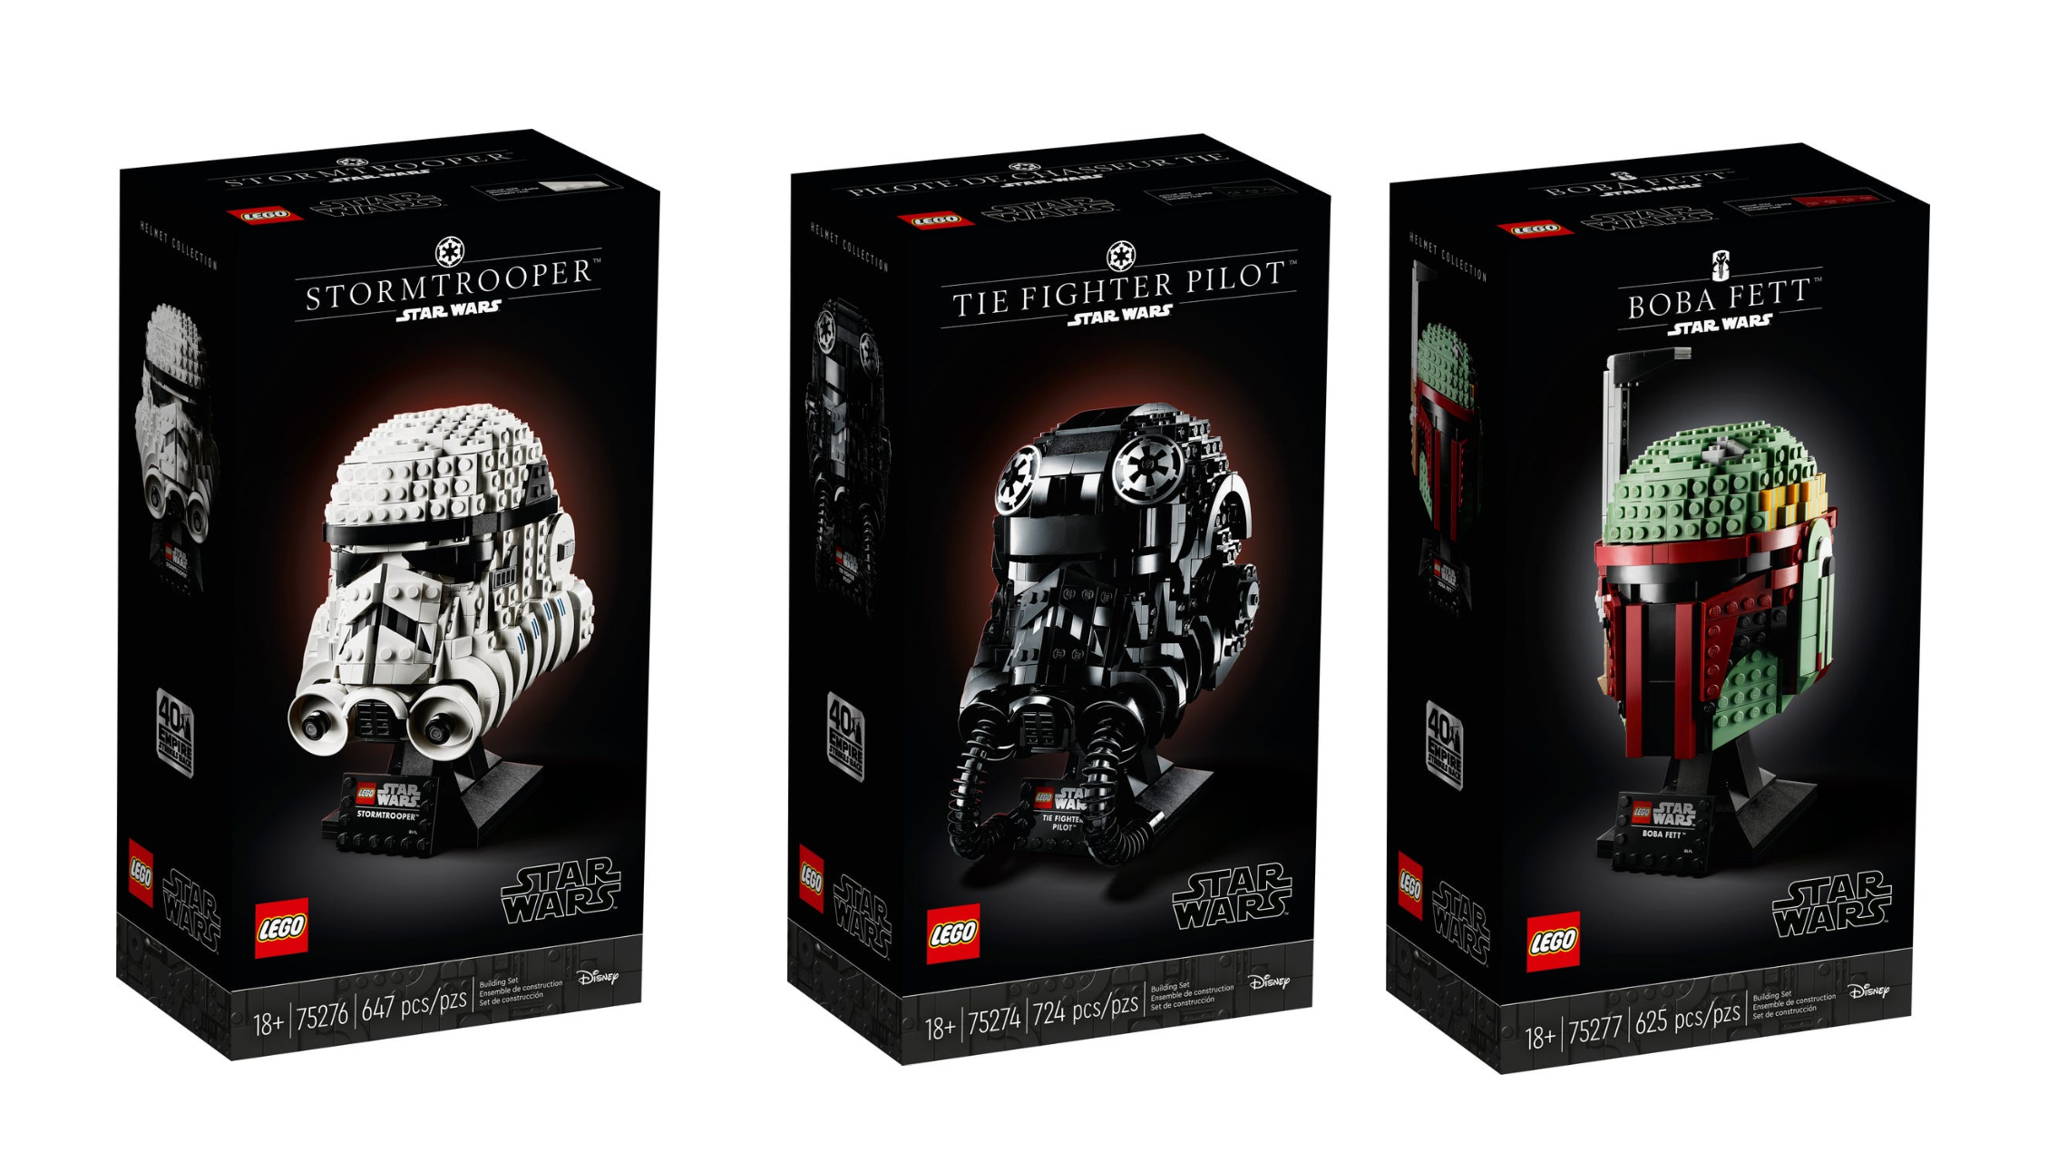 Star Wars example #53: LEGO Gets It, Designs New Star Wars Kits And Packaging Aimed At Adults